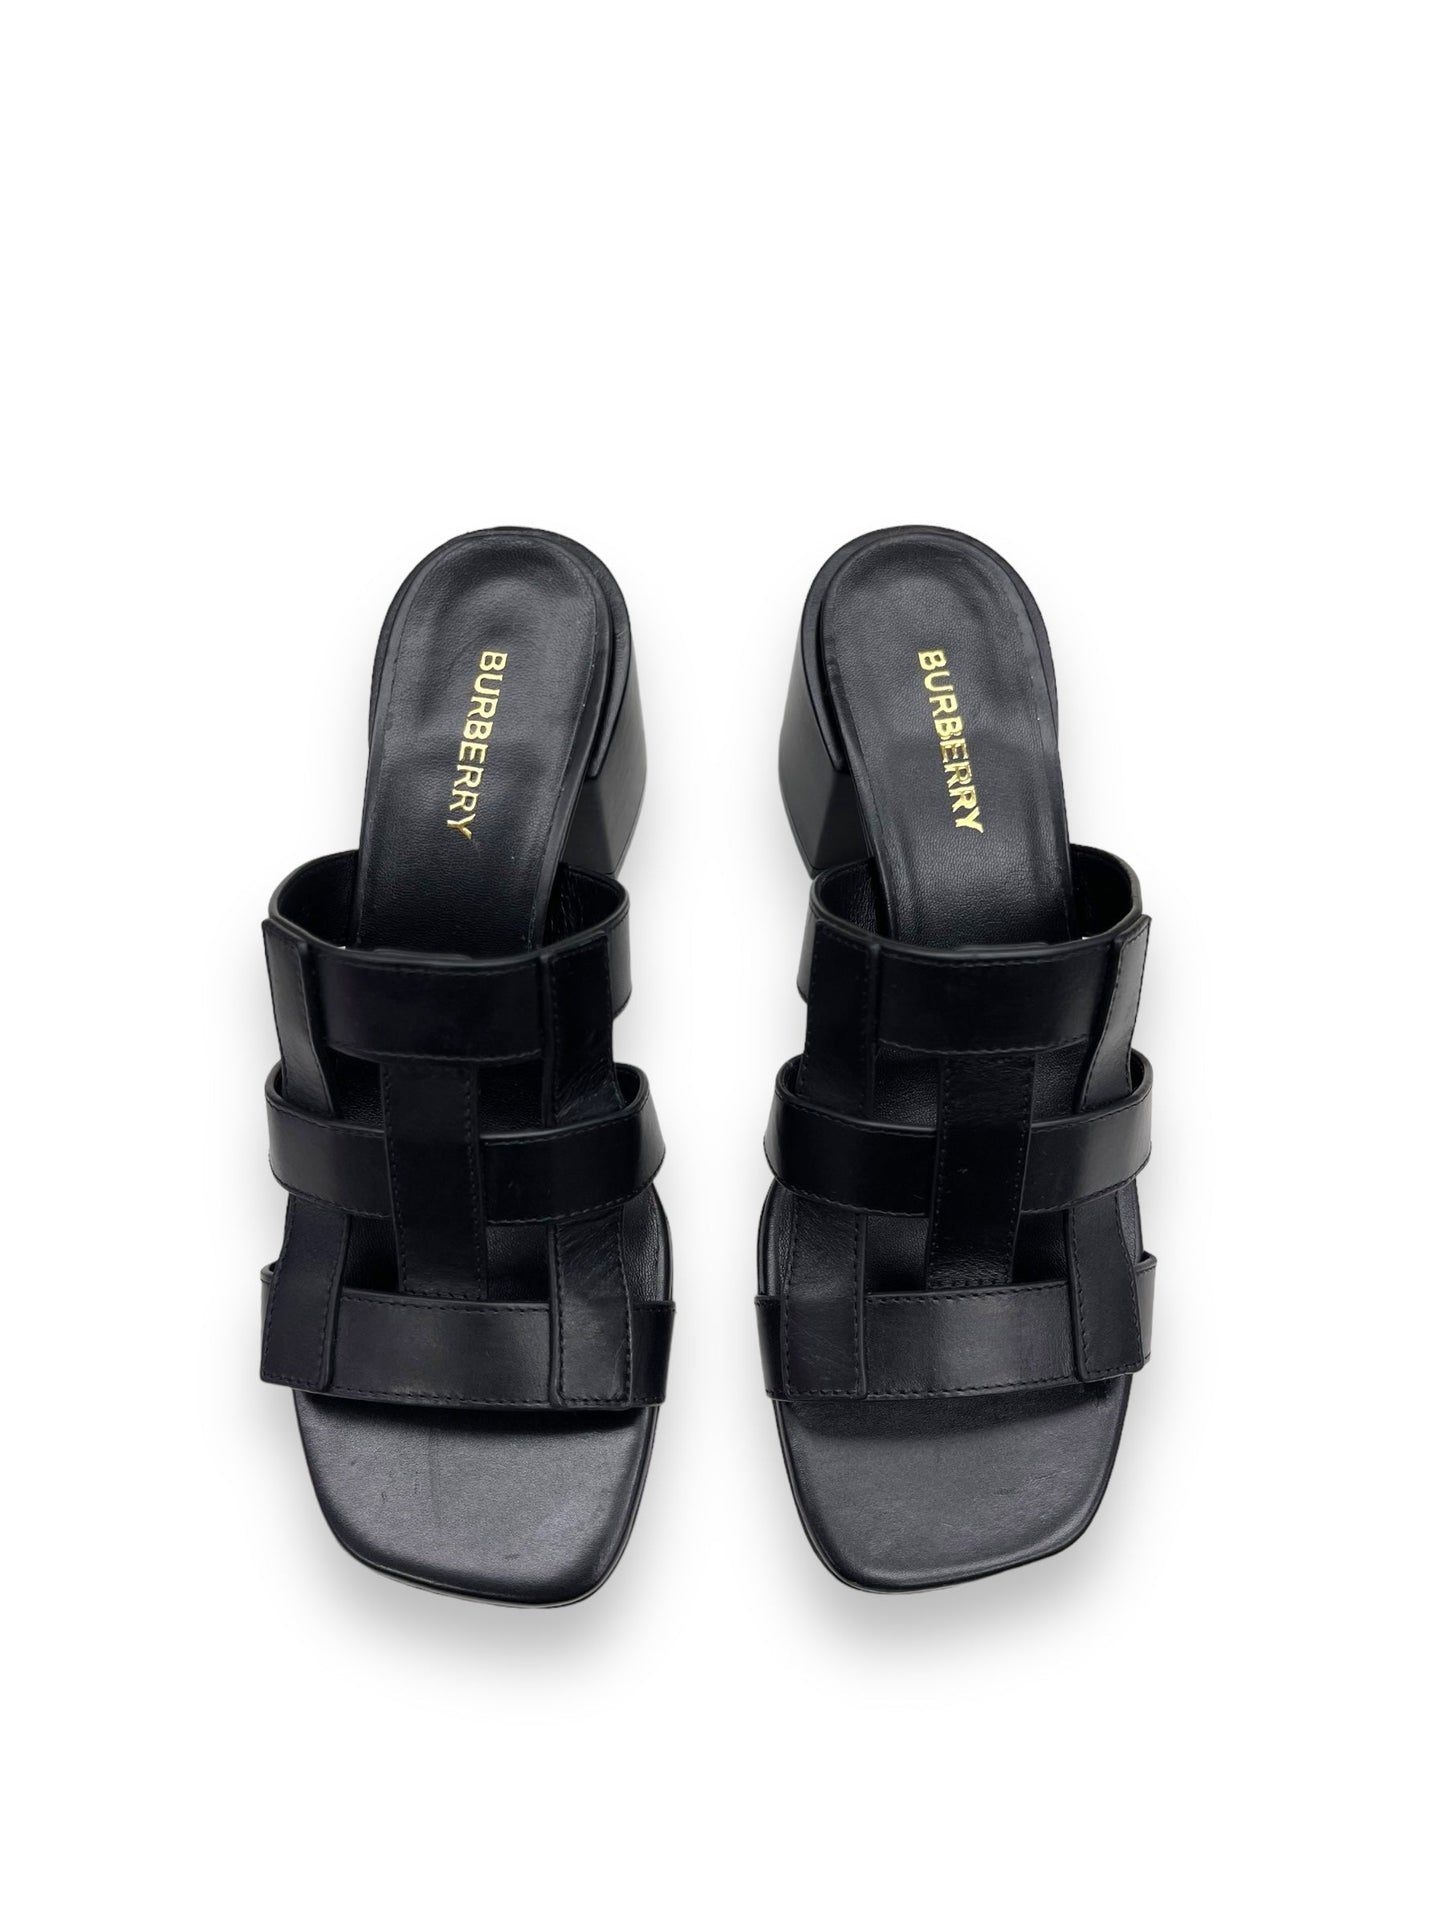 Sandals Designer By Burberry  Size: 6.5